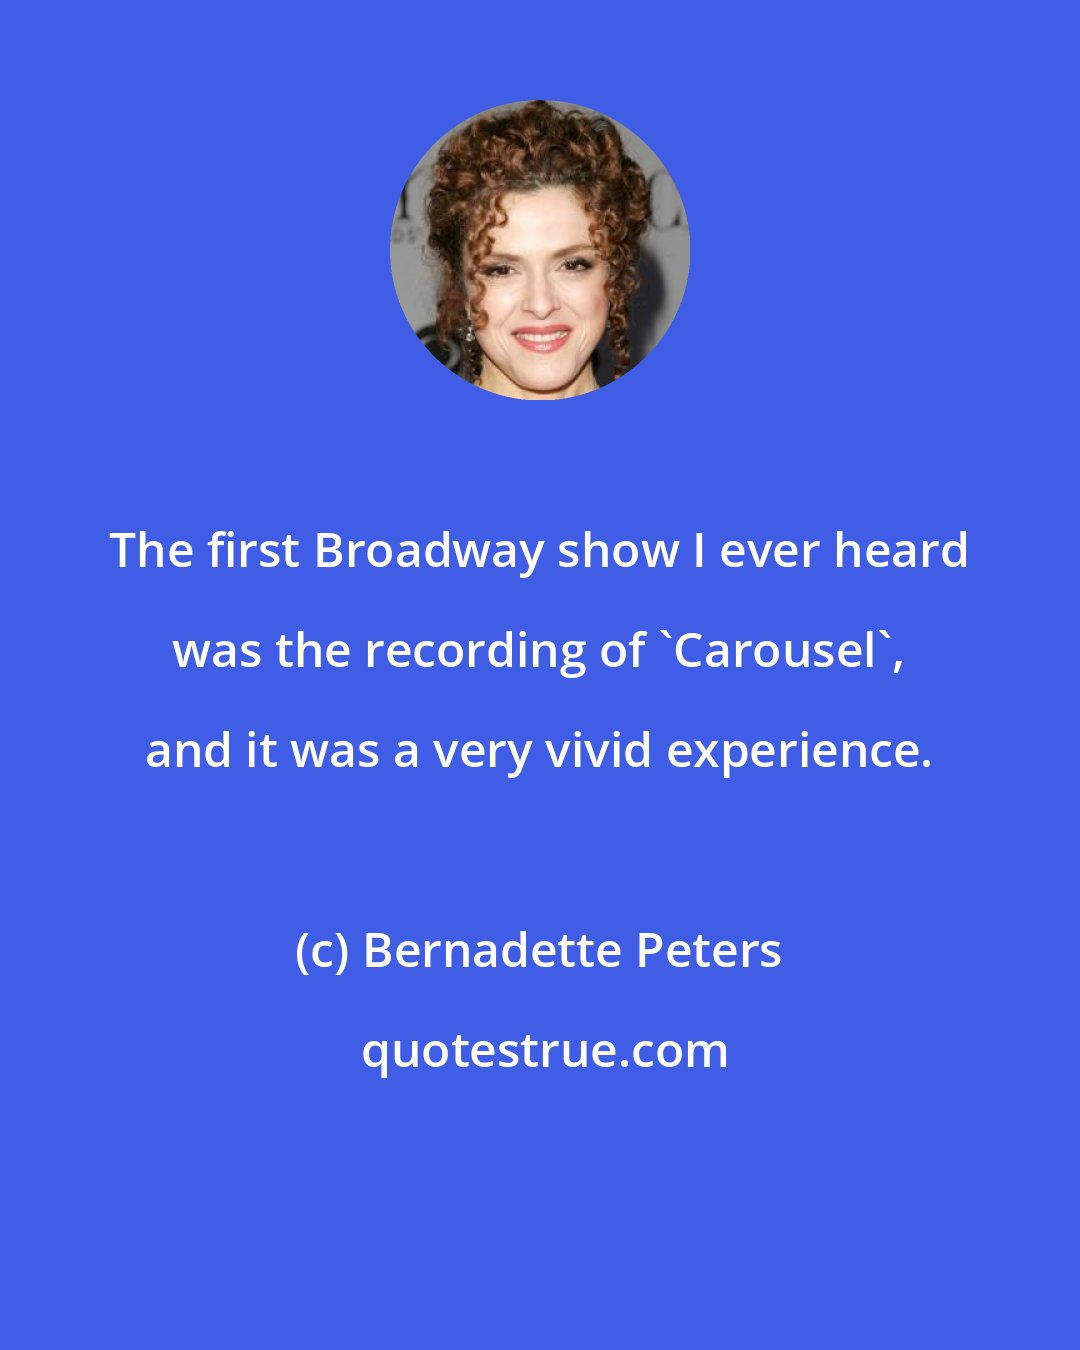 Bernadette Peters: The first Broadway show I ever heard was the recording of 'Carousel', and it was a very vivid experience.